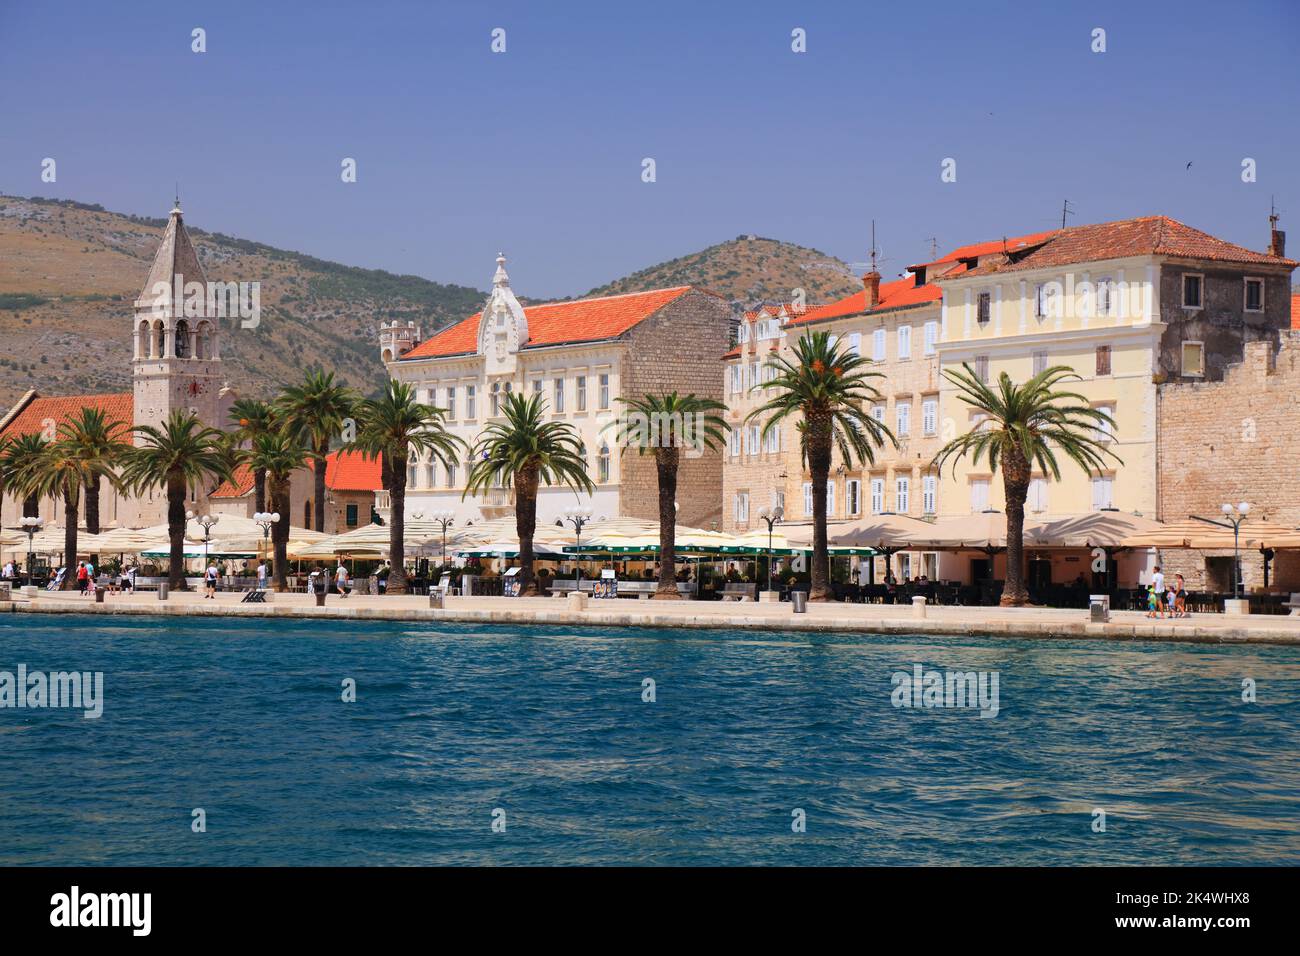 TROGIR, CROATIA - JUNE 23, 2021: Medieval townscape view of Trogir, Croatia. Trogir is a medieval town in Dalmatia listed as UNESCO World Heritage Sit Stock Photo